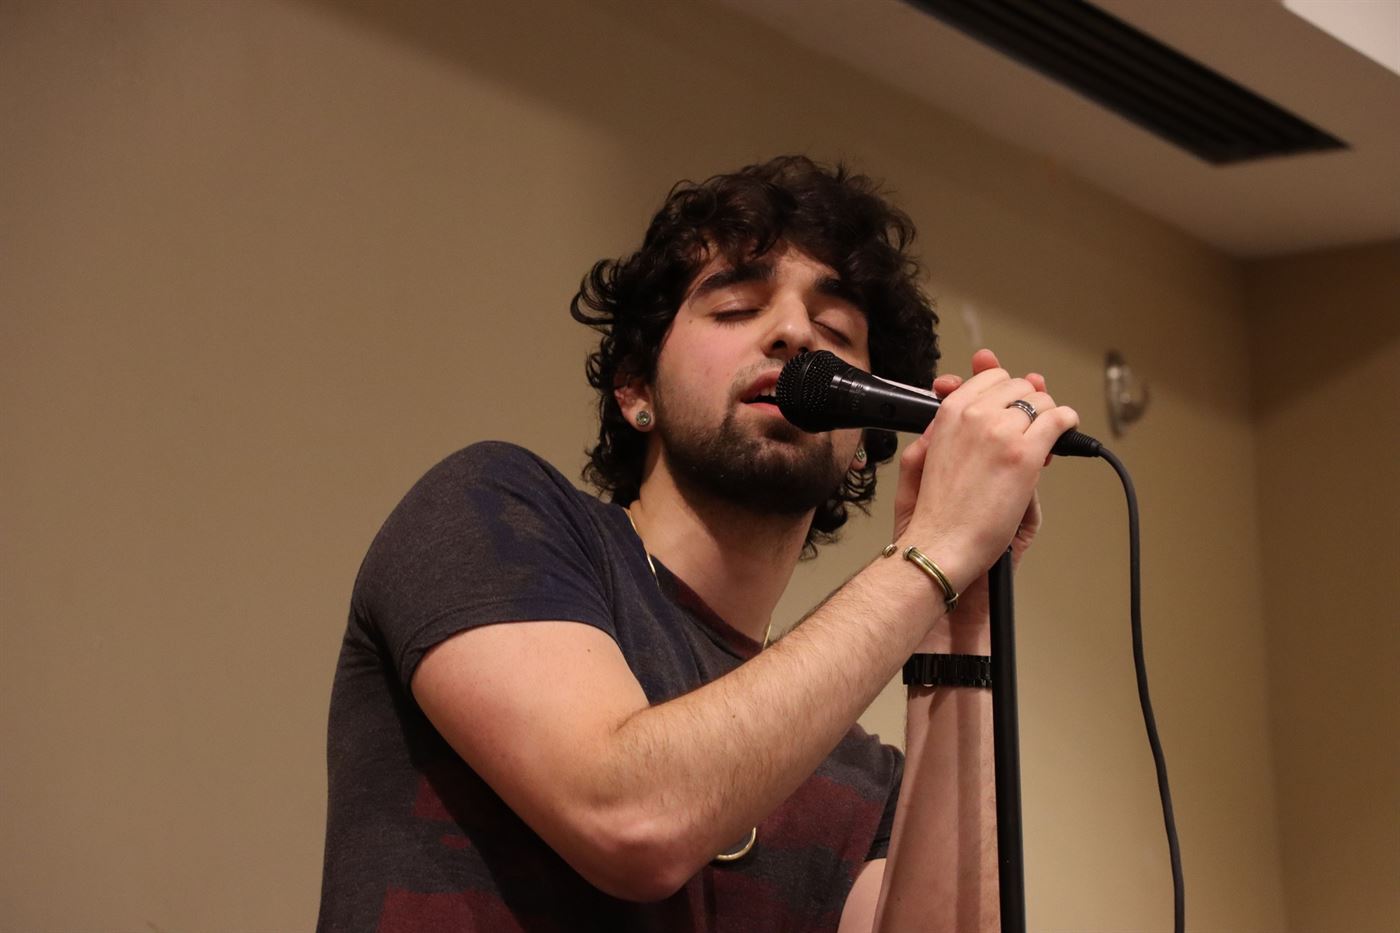 Shane Consalvo, senior Television and Digital Media major with a concentration in Audio and Sound Design, sings an acoustic version of "Valerie" by Amy Winehouse.